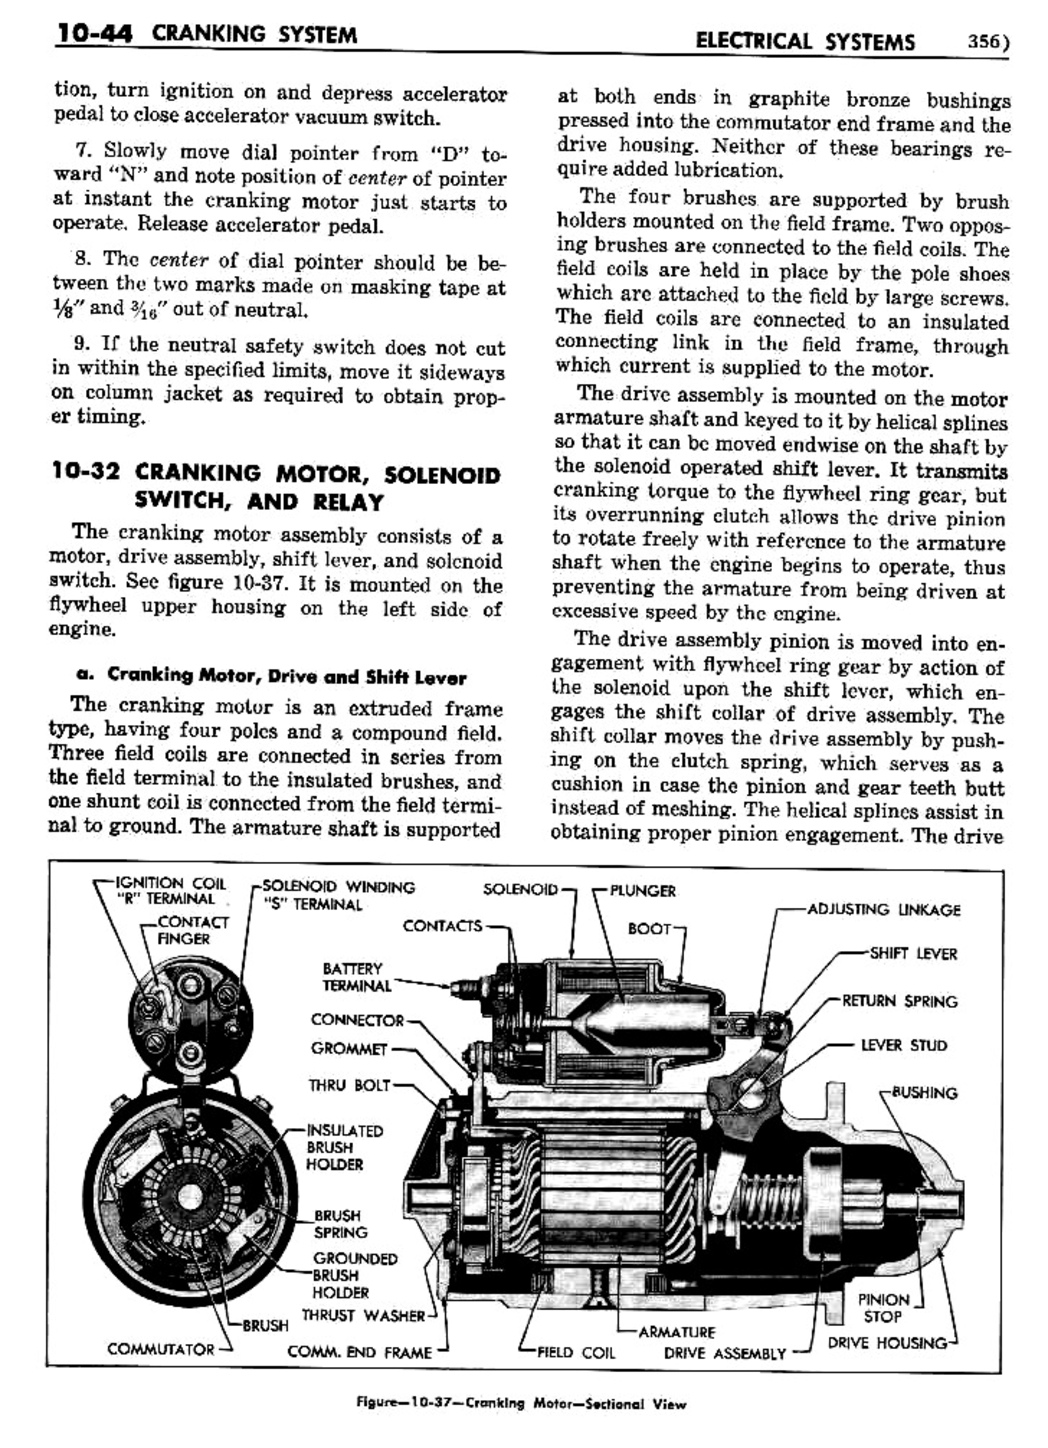 n_11 1954 Buick Shop Manual - Electrical Systems-044-044.jpg